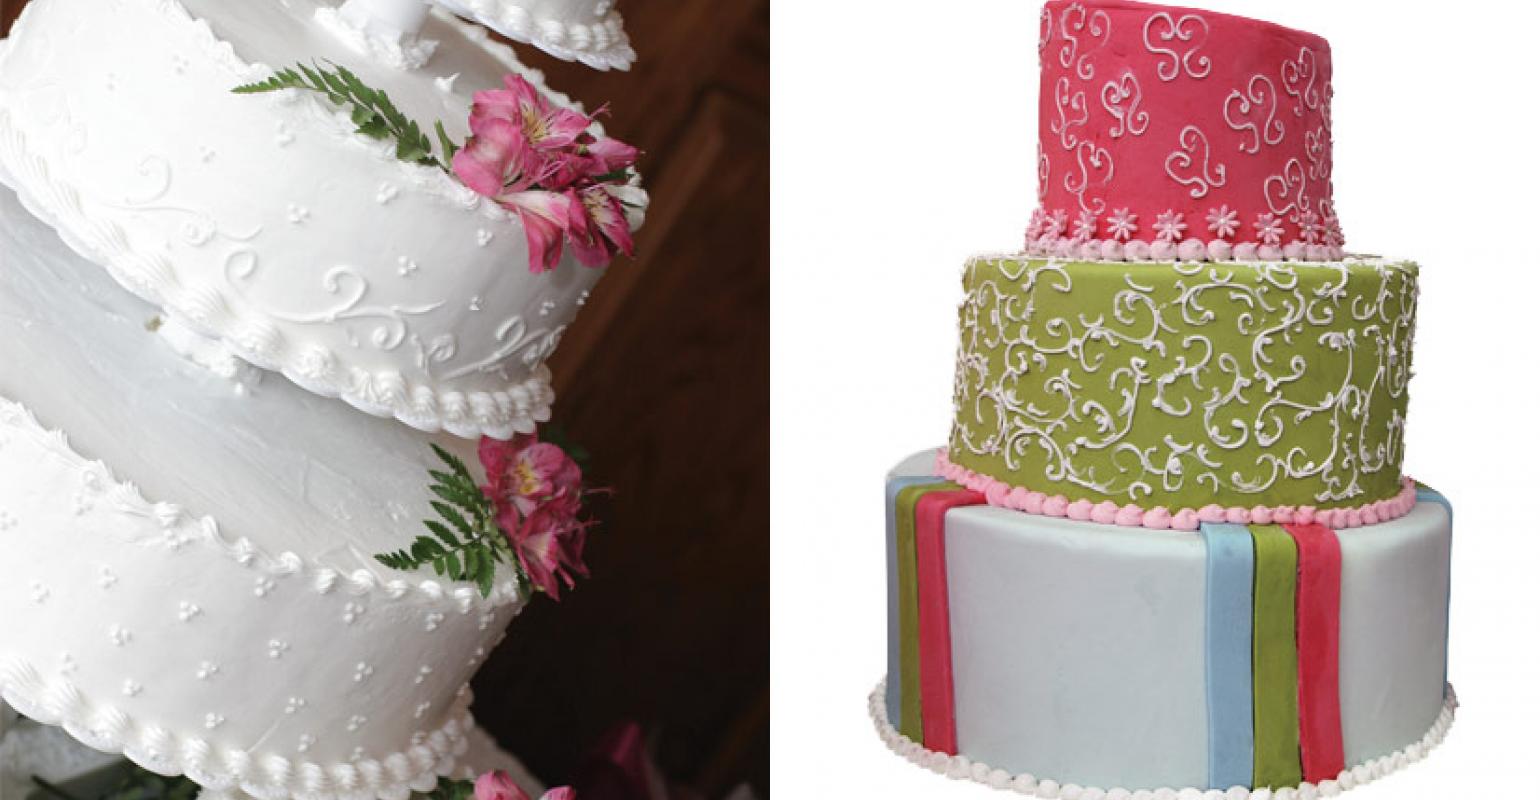 Classic Wedding Cake - French Bread Cakes & Pastries